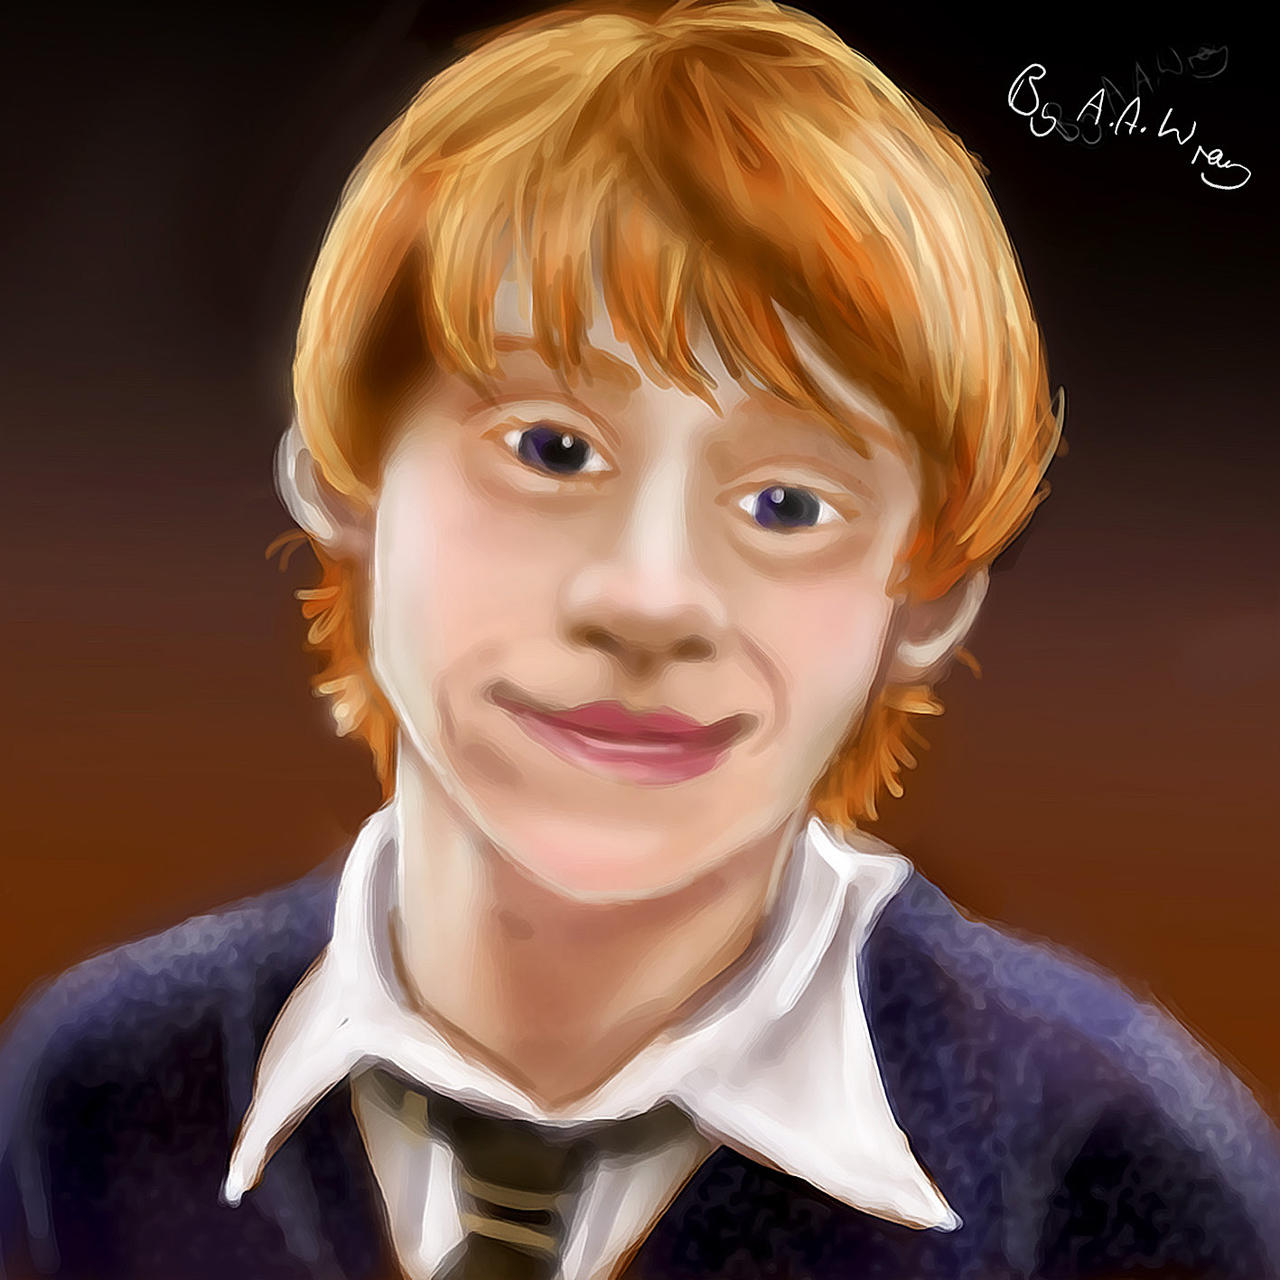 Harry Potter - Ron Weasley Wall Mural